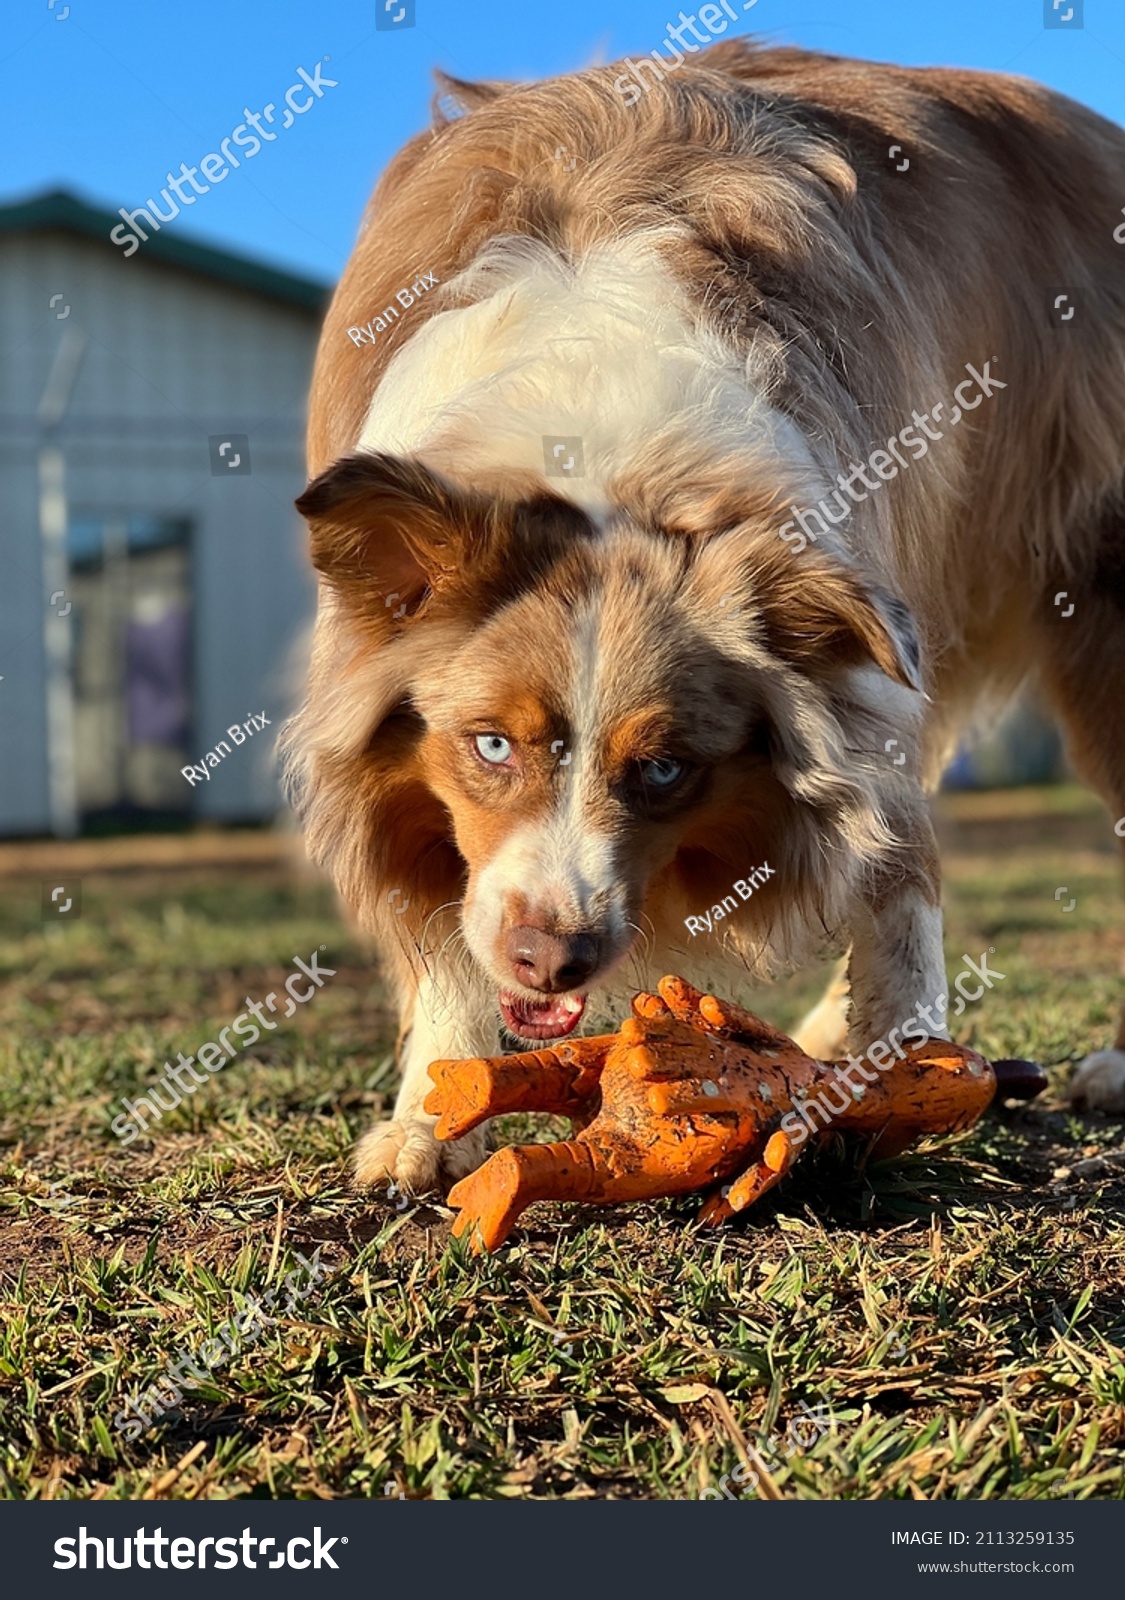 Low view of red and white long coated purebred miniature Australian shepherd dog guarding squeaky toy chicken outside in yard  #2113259135